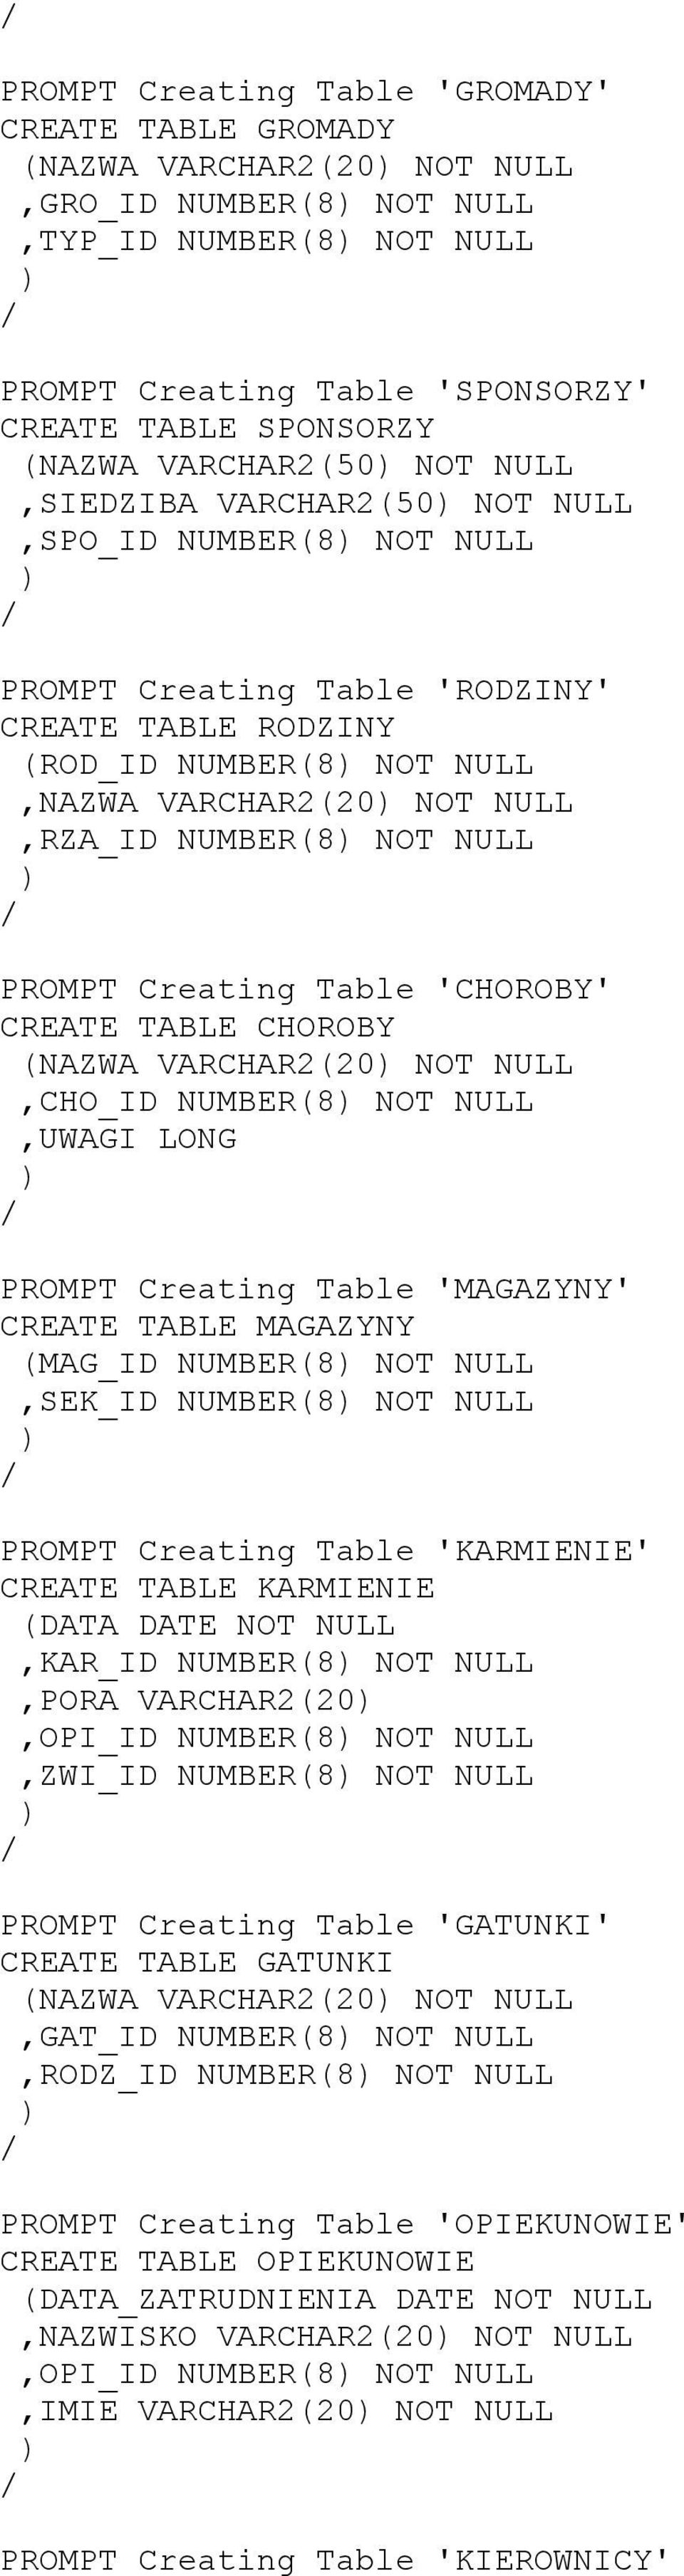 NOT NULL PROMPT Creating Table 'CHOROBY' CREATE TABLE CHOROBY (NAZWA VARCHAR2(20 NOT NULL,CHO_ID NUMBER(8 NOT NULL,UWAGI LONG PROMPT Creating Table 'MAGAZYNY' CREATE TABLE MAGAZYNY (MAG_ID NUMBER(8